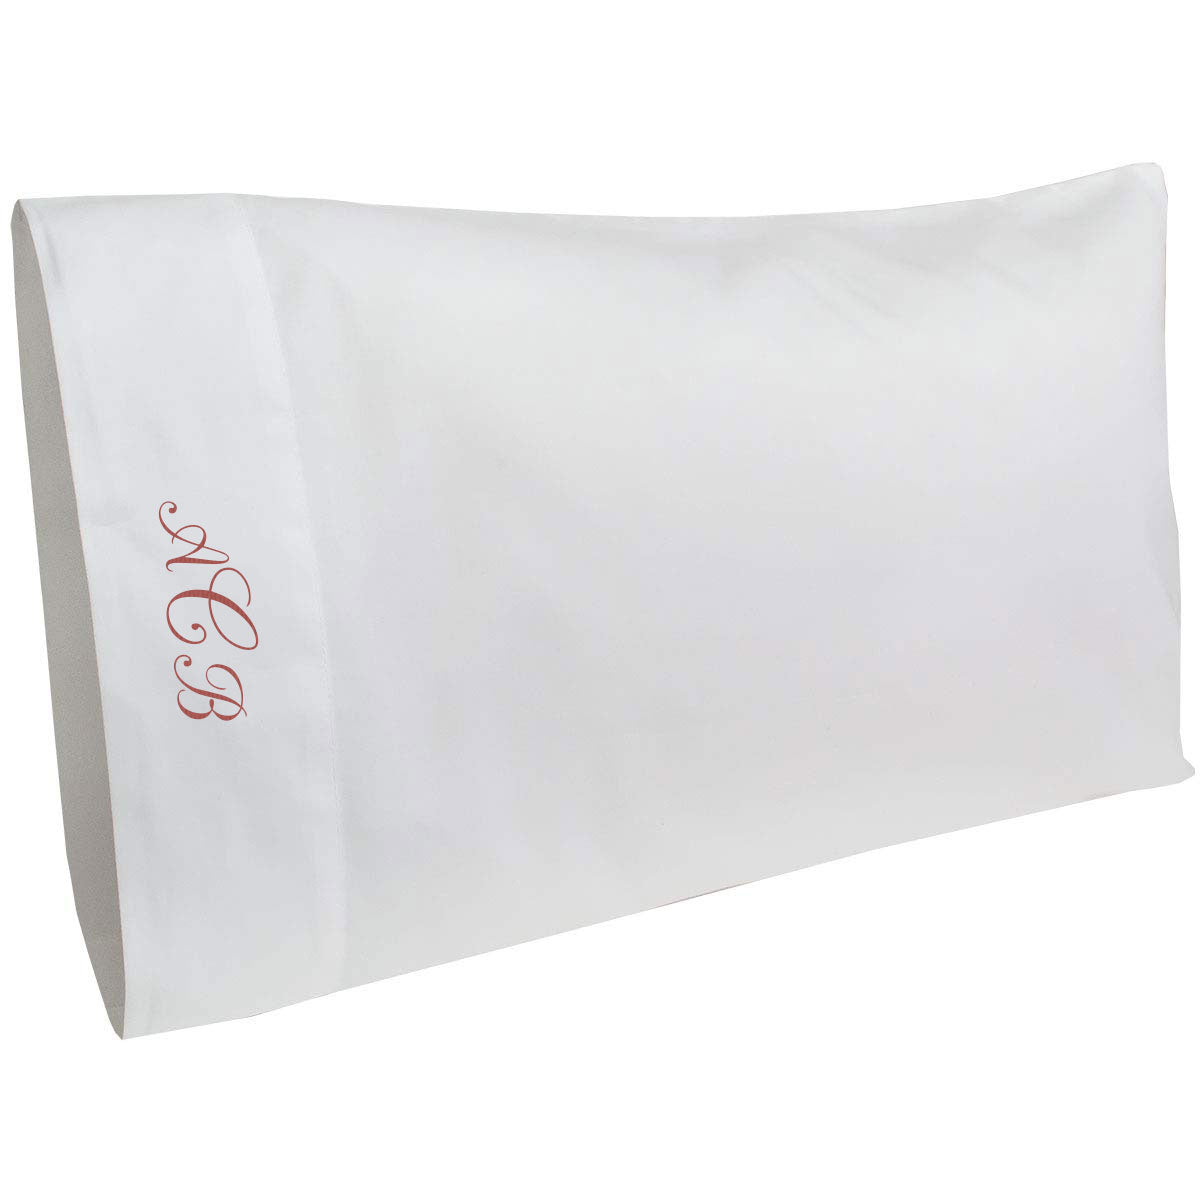 New! Made in the USA 100% Organic Cotton Monogrammed Pillow Cases | Towels by GUS